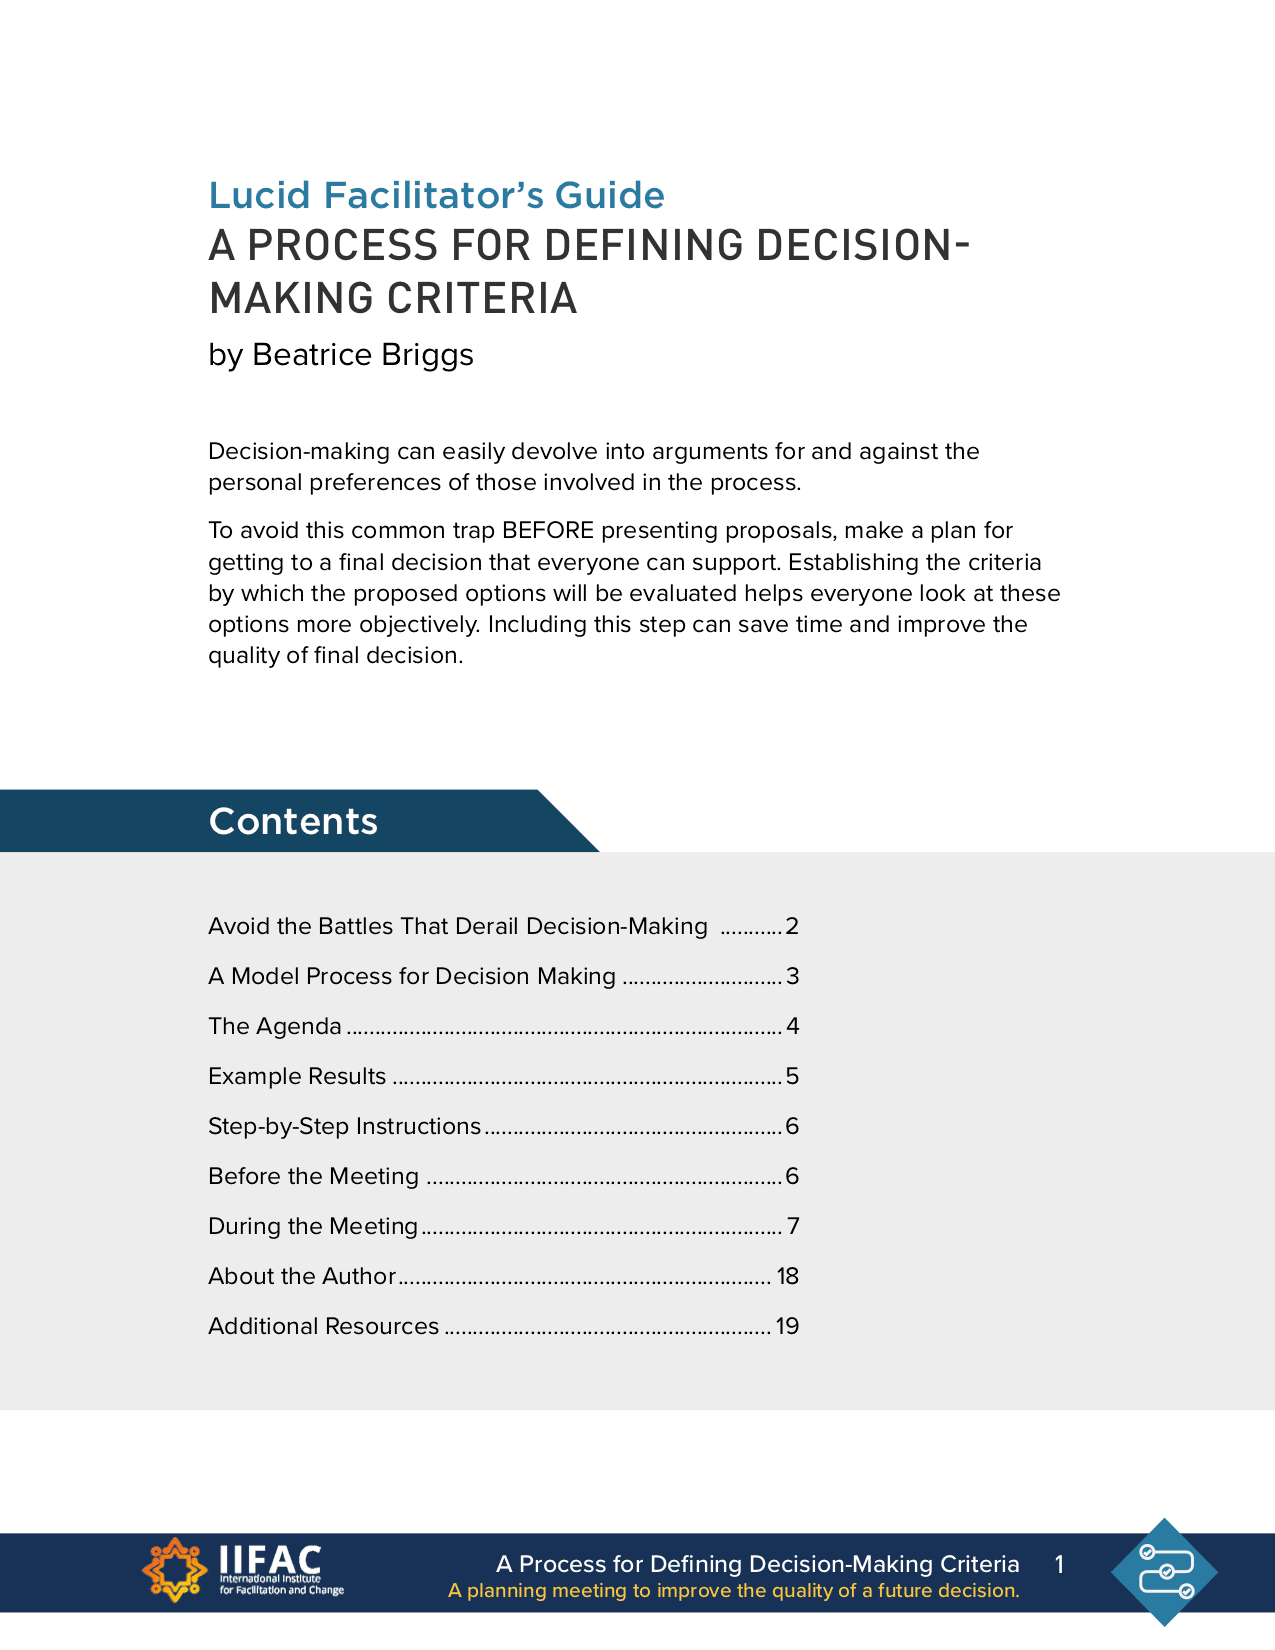 Guide to Defining Decision Making Criteria